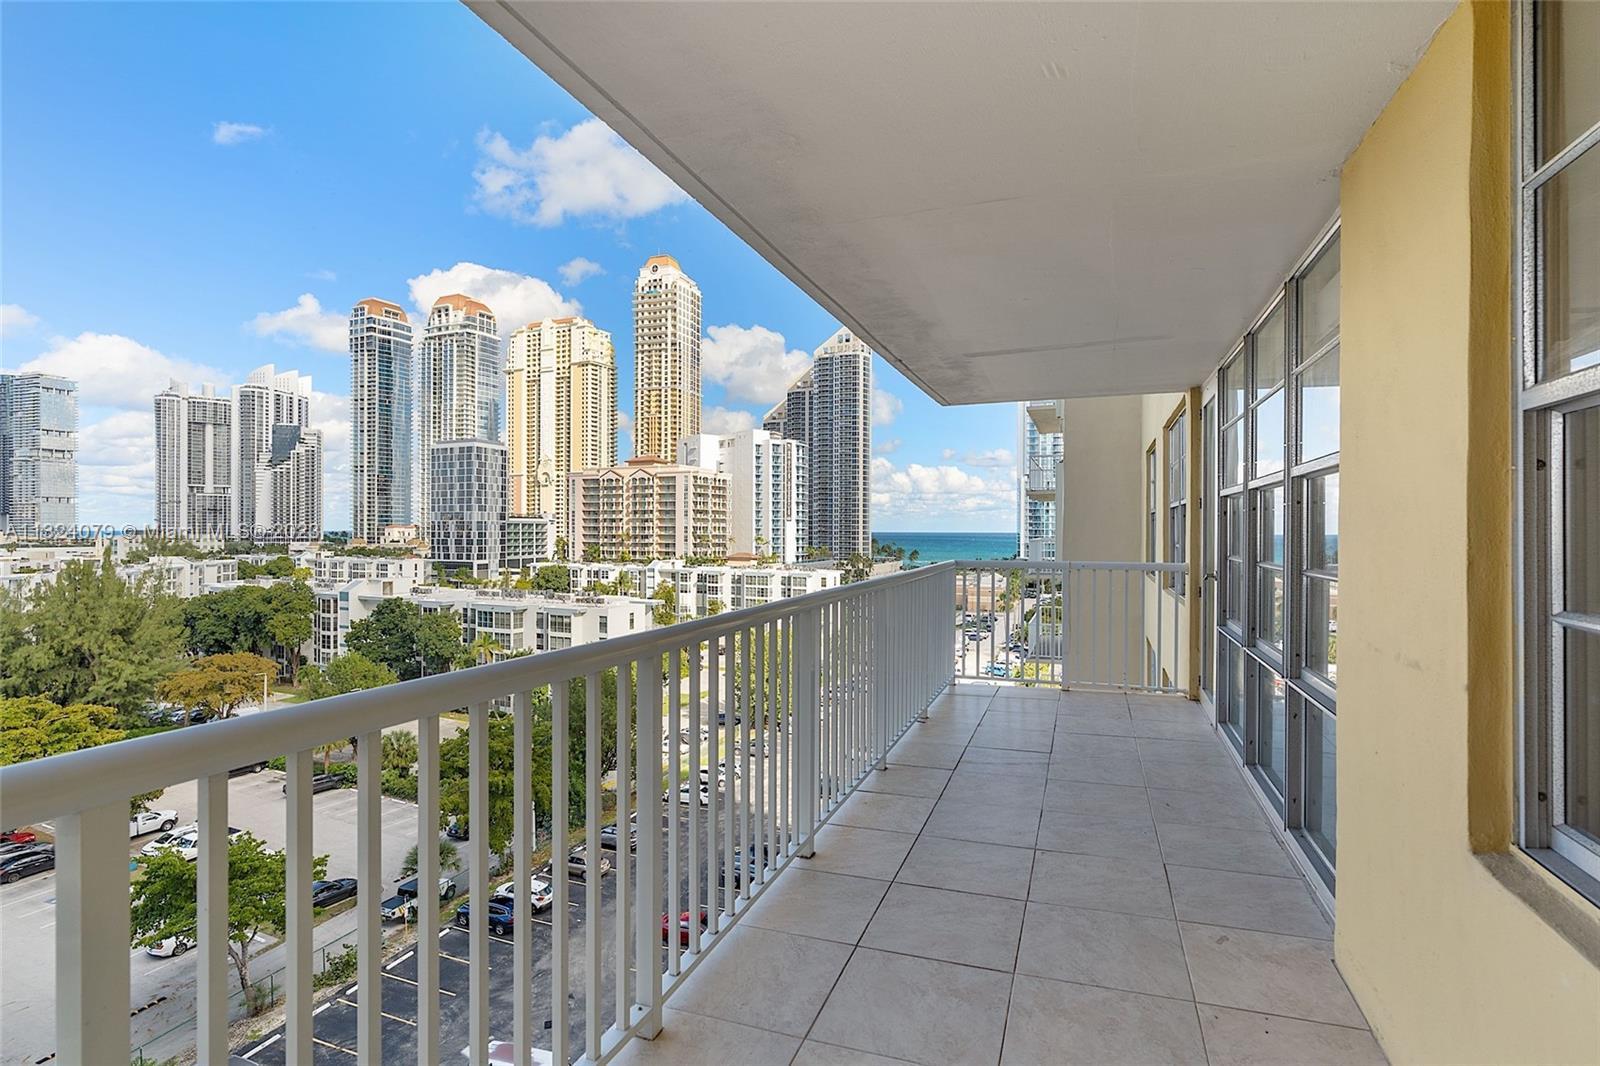 Welcome to unit 1015, a light, bright and airy split floor plan 2BD 2BA unit in 400 Winston Tower. T